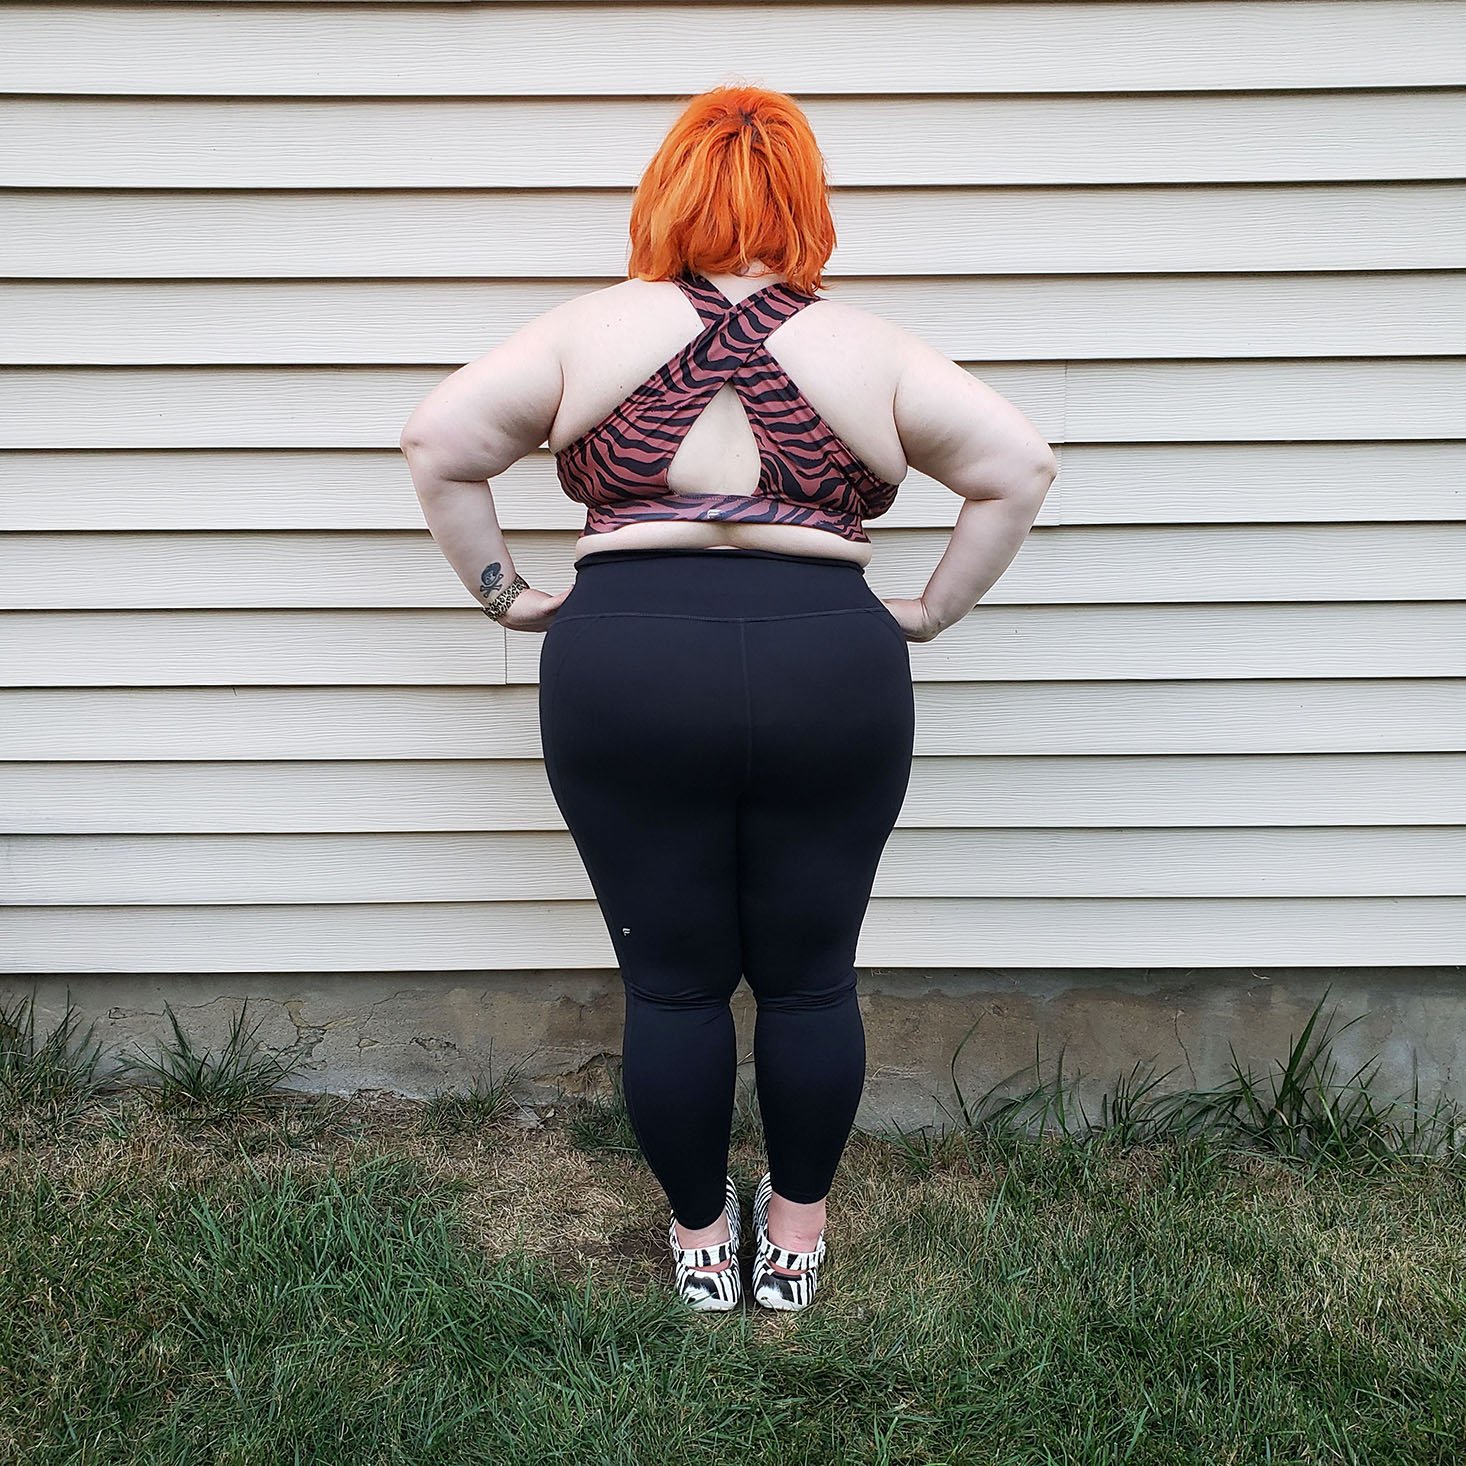 Fabletics VIP Plus Size Sassy Zebra Print Outfits 2022 Review